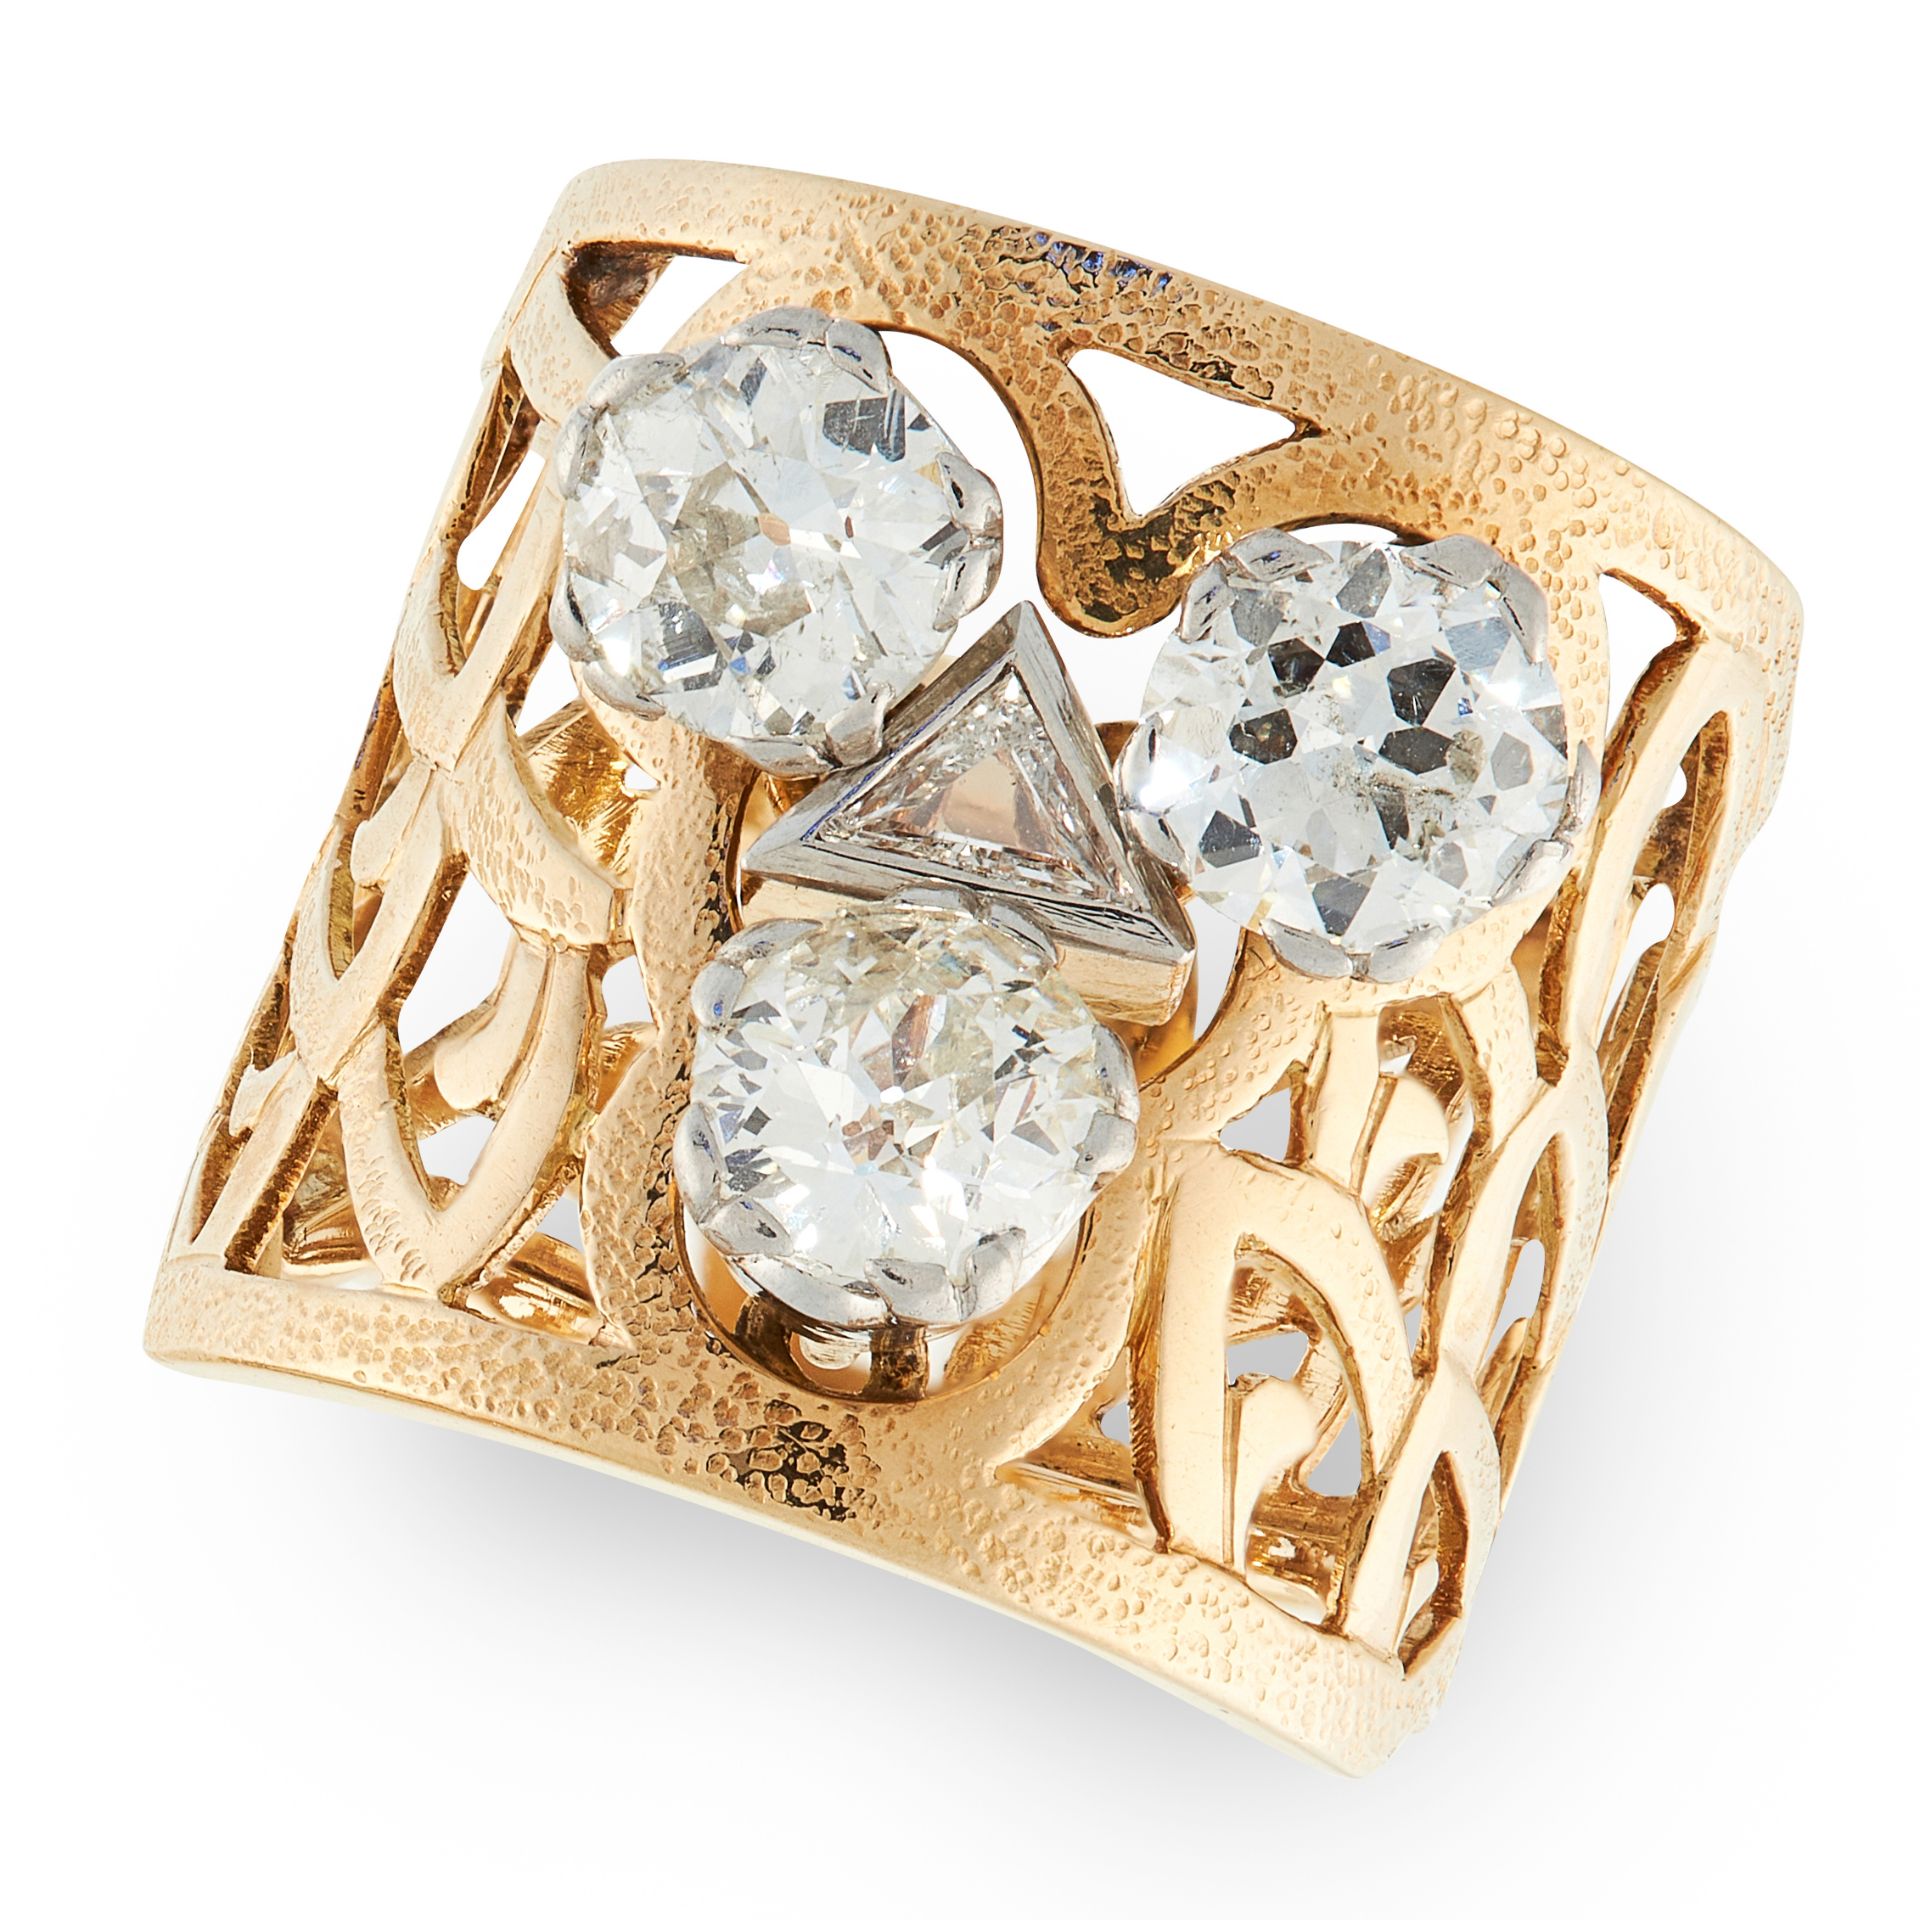 A DIAMOND DRESS RING in yellow gold, in open framework design, set with a trio of round cut diamonds